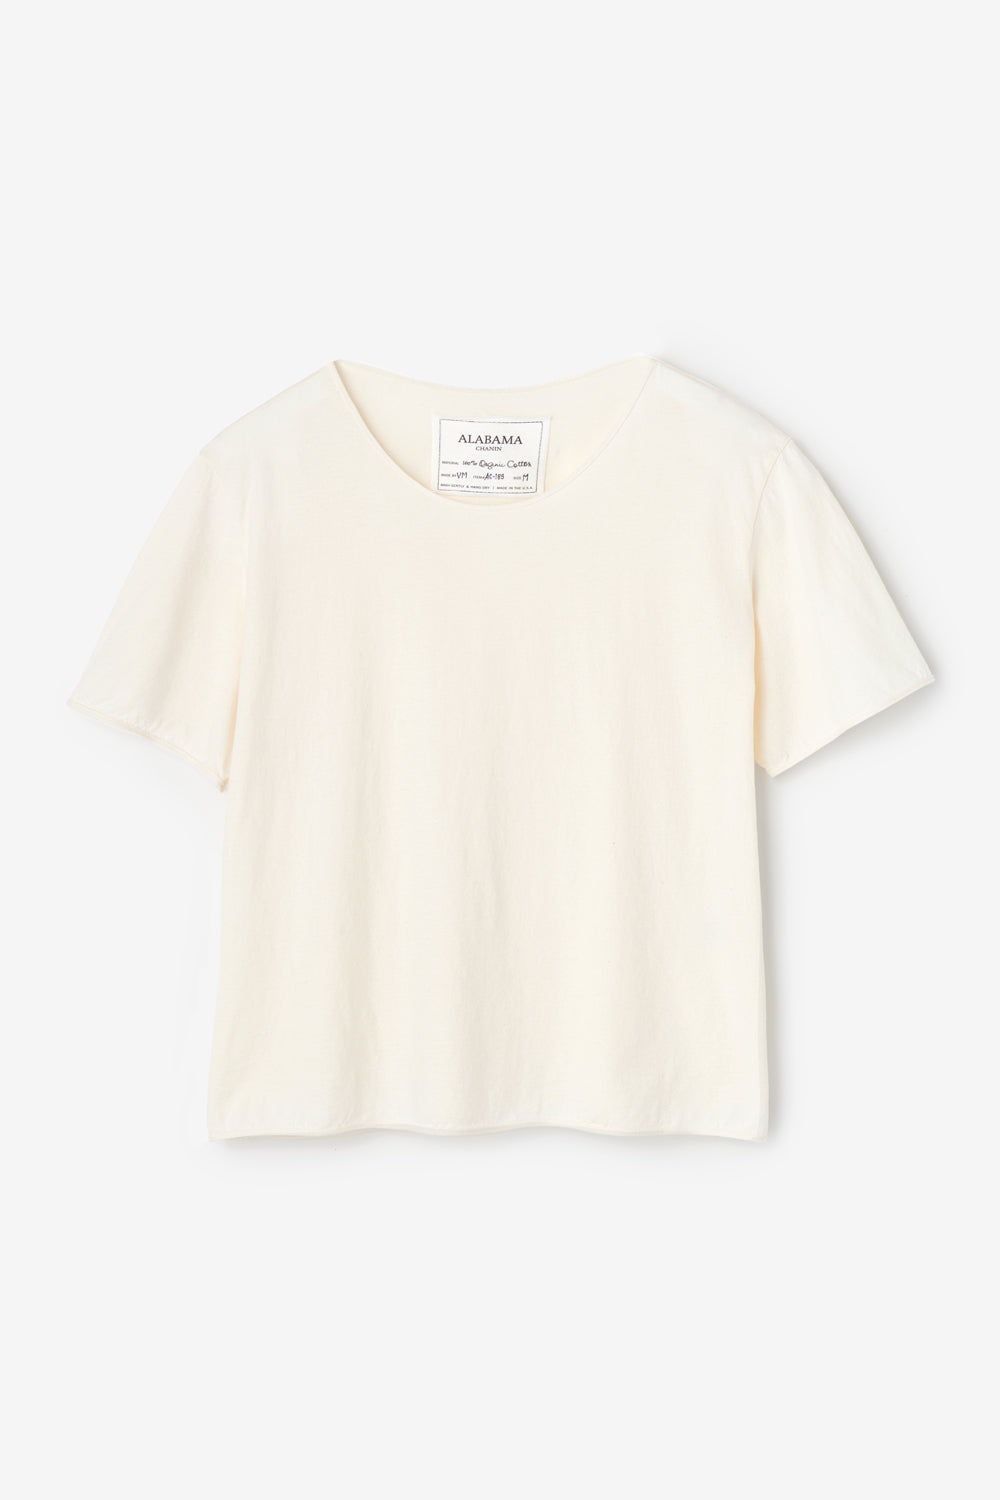 Alabama Chanin boxy tee made from 100% organic cotton in natural.